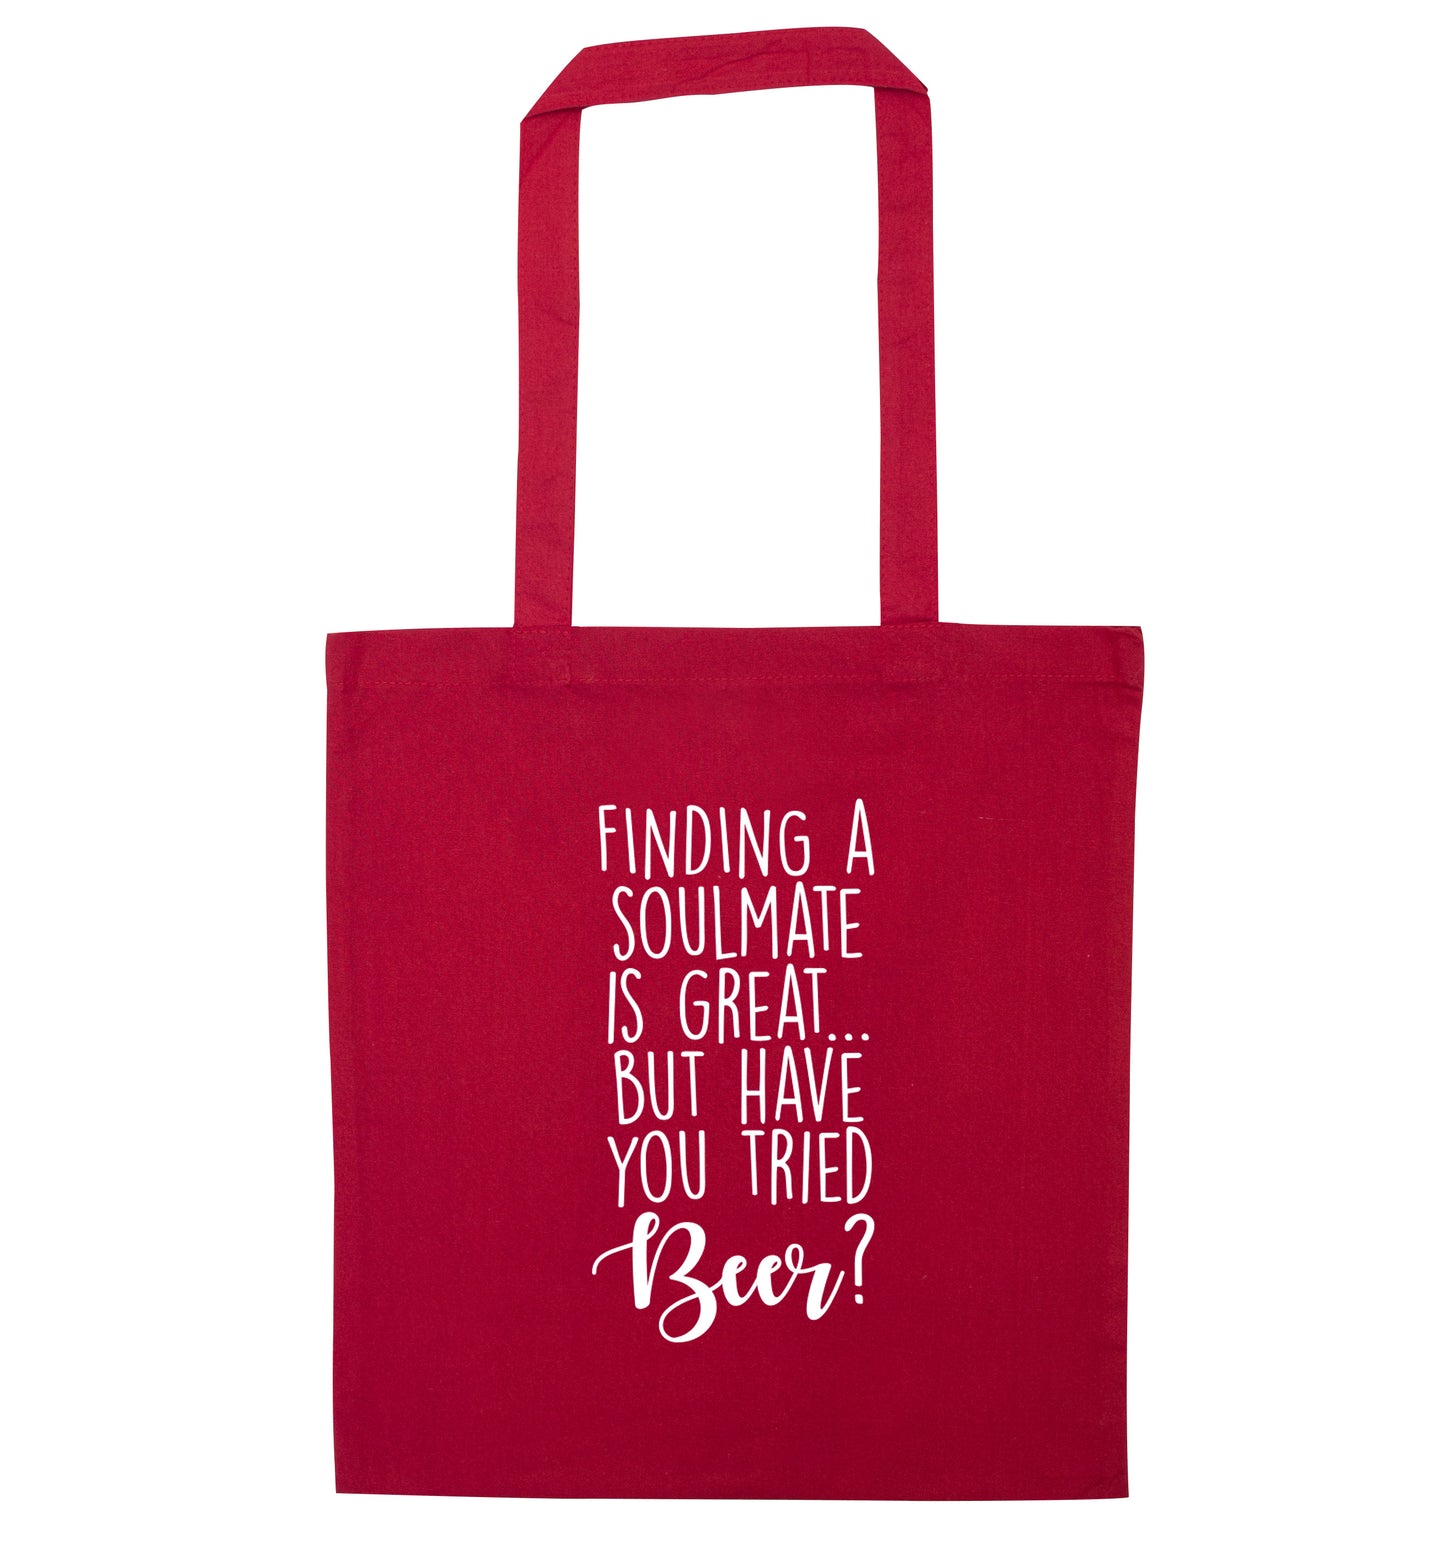 Finding a soulmate is great but have you tried beer? red tote bag